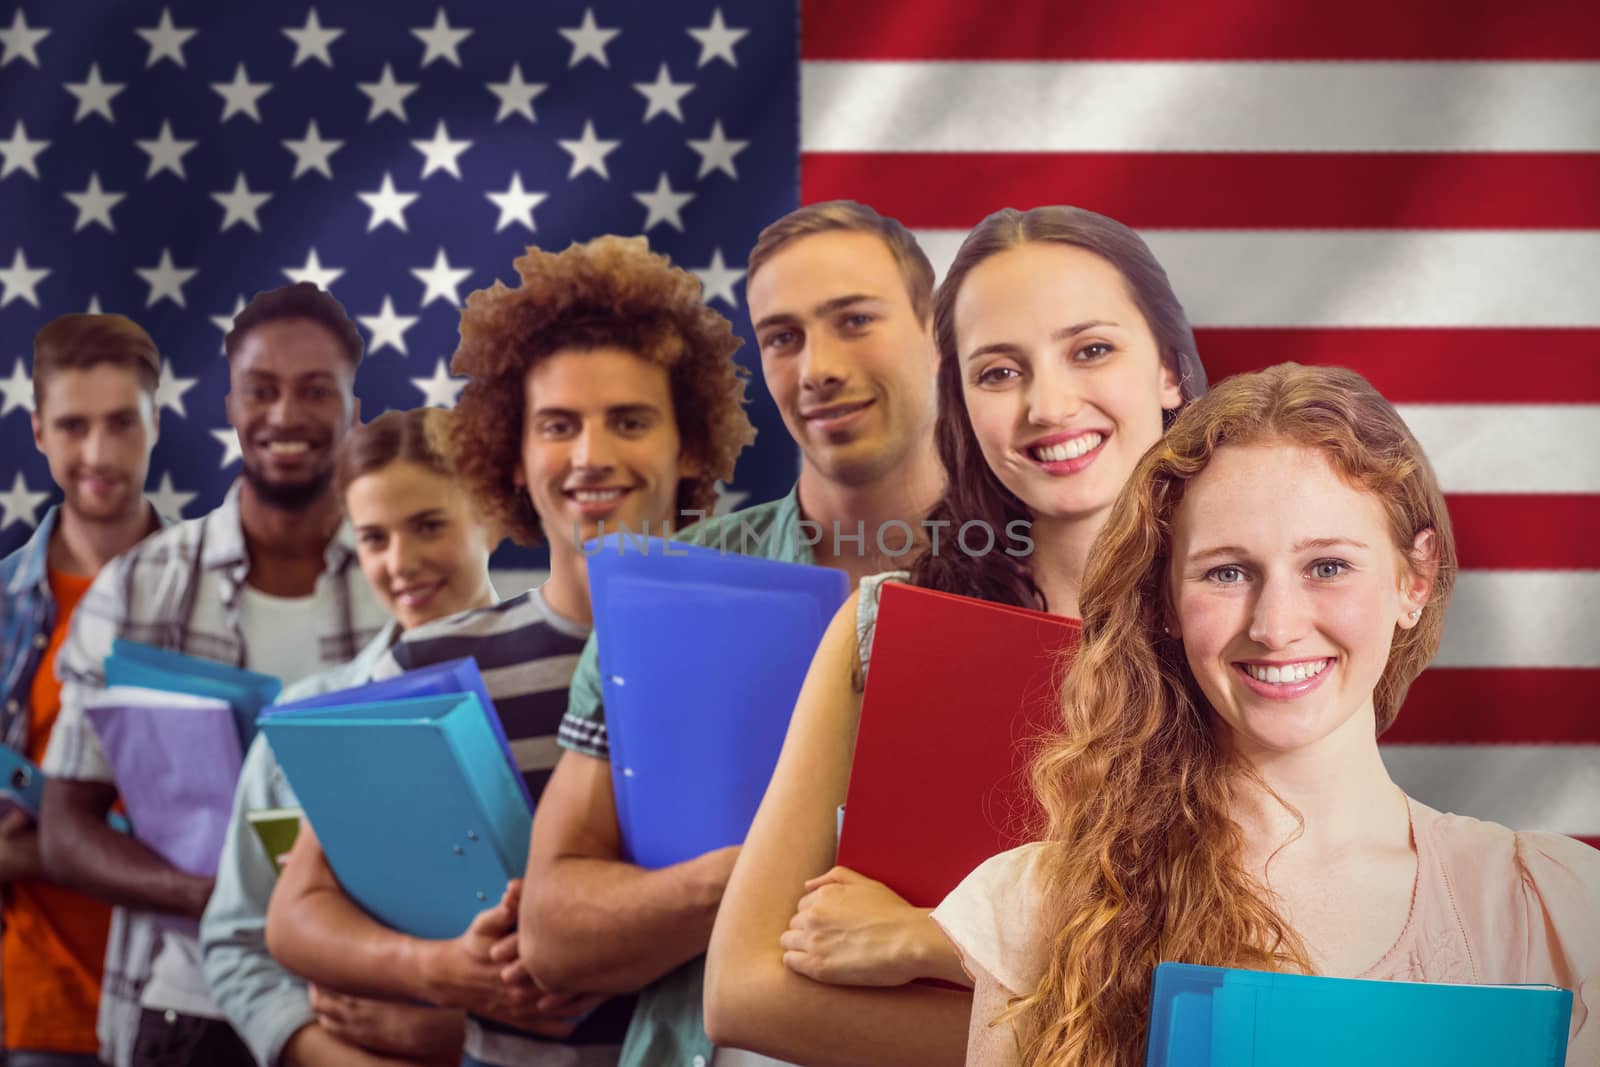 Fashion students smiling at camera together against digitally generated american national flag